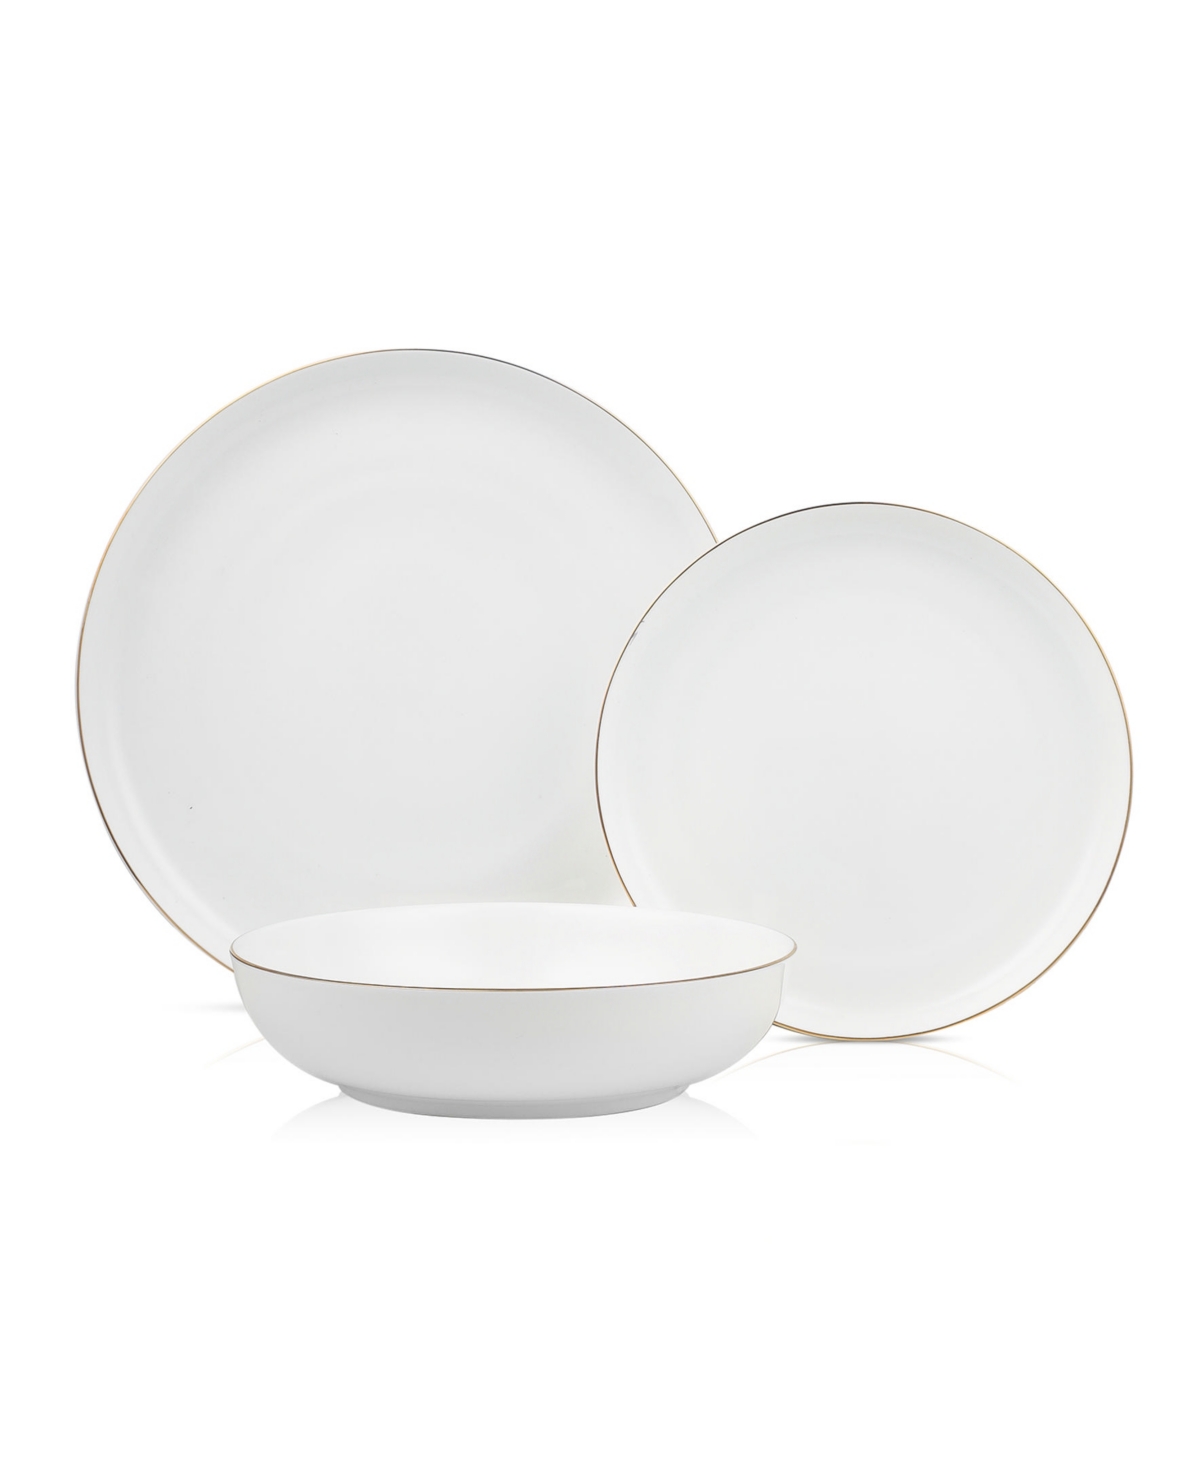 Stone Lain Gabrielle 24 Piece Dinnerware Set, Service For 8 In White And Gold